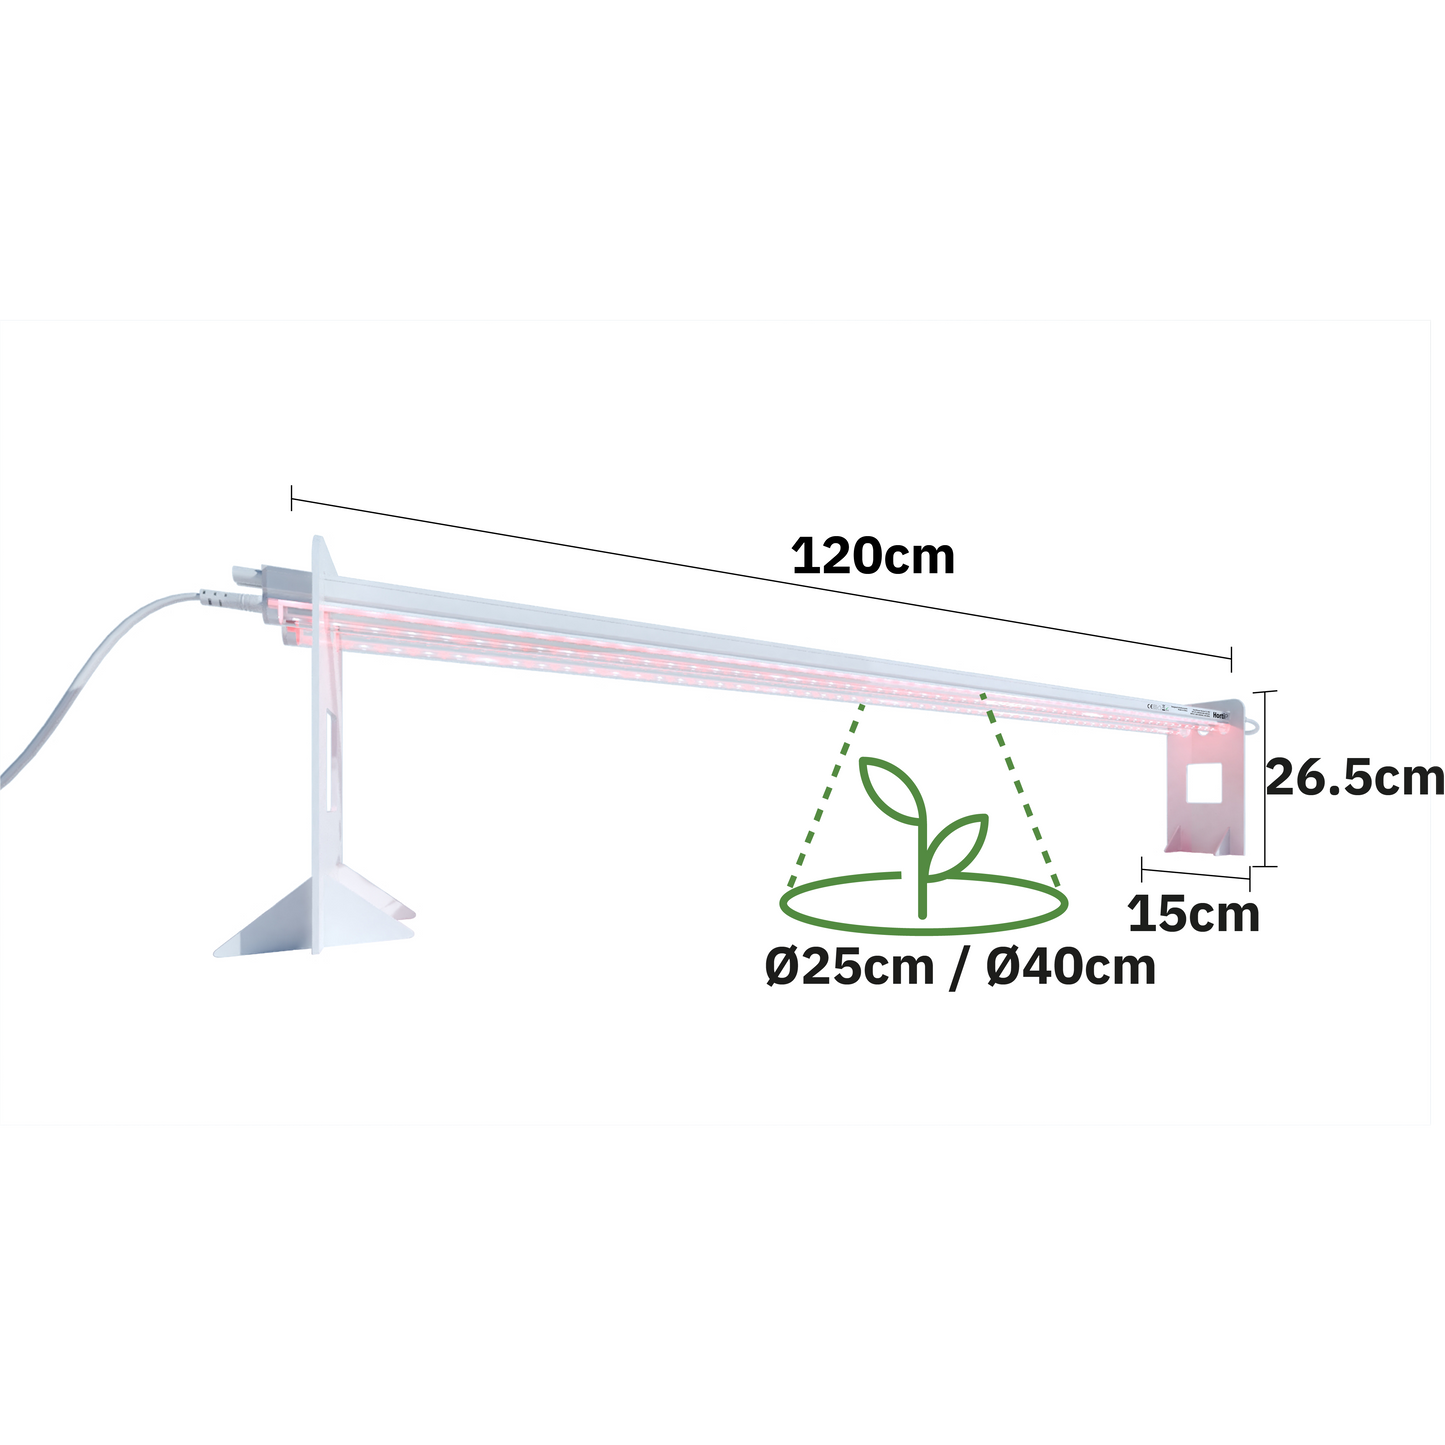 Image of the HortiPower grow lights HOME (120cm) with dimension